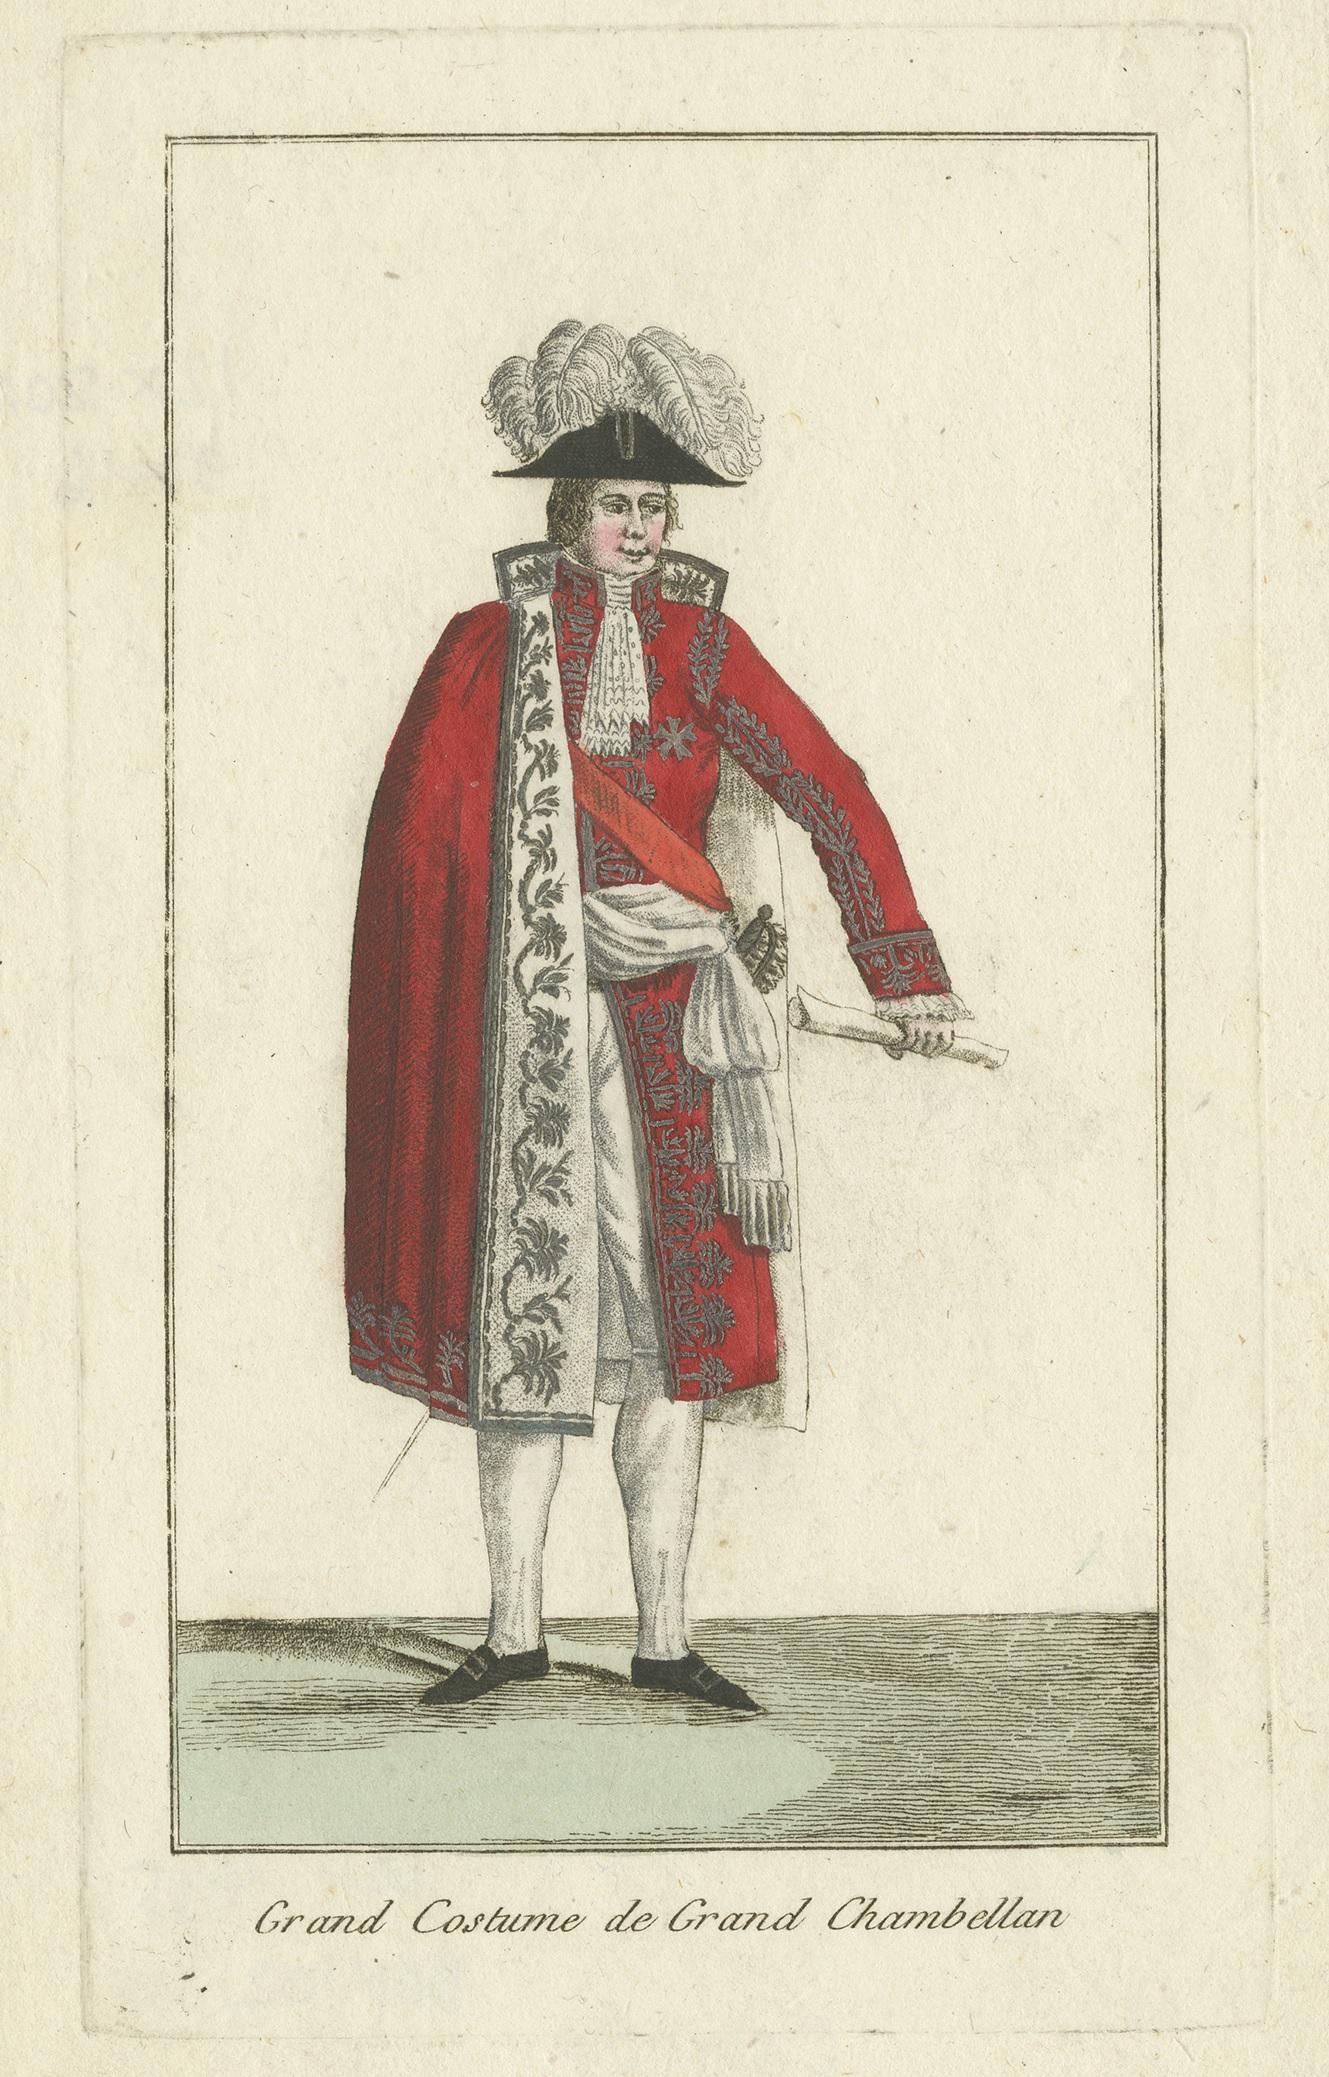 Antique print titled 'Grand Costume de Grand Chambellan'. Costume print of a French chamerlain. This print originates from a small booklet with engravings of French costumes.